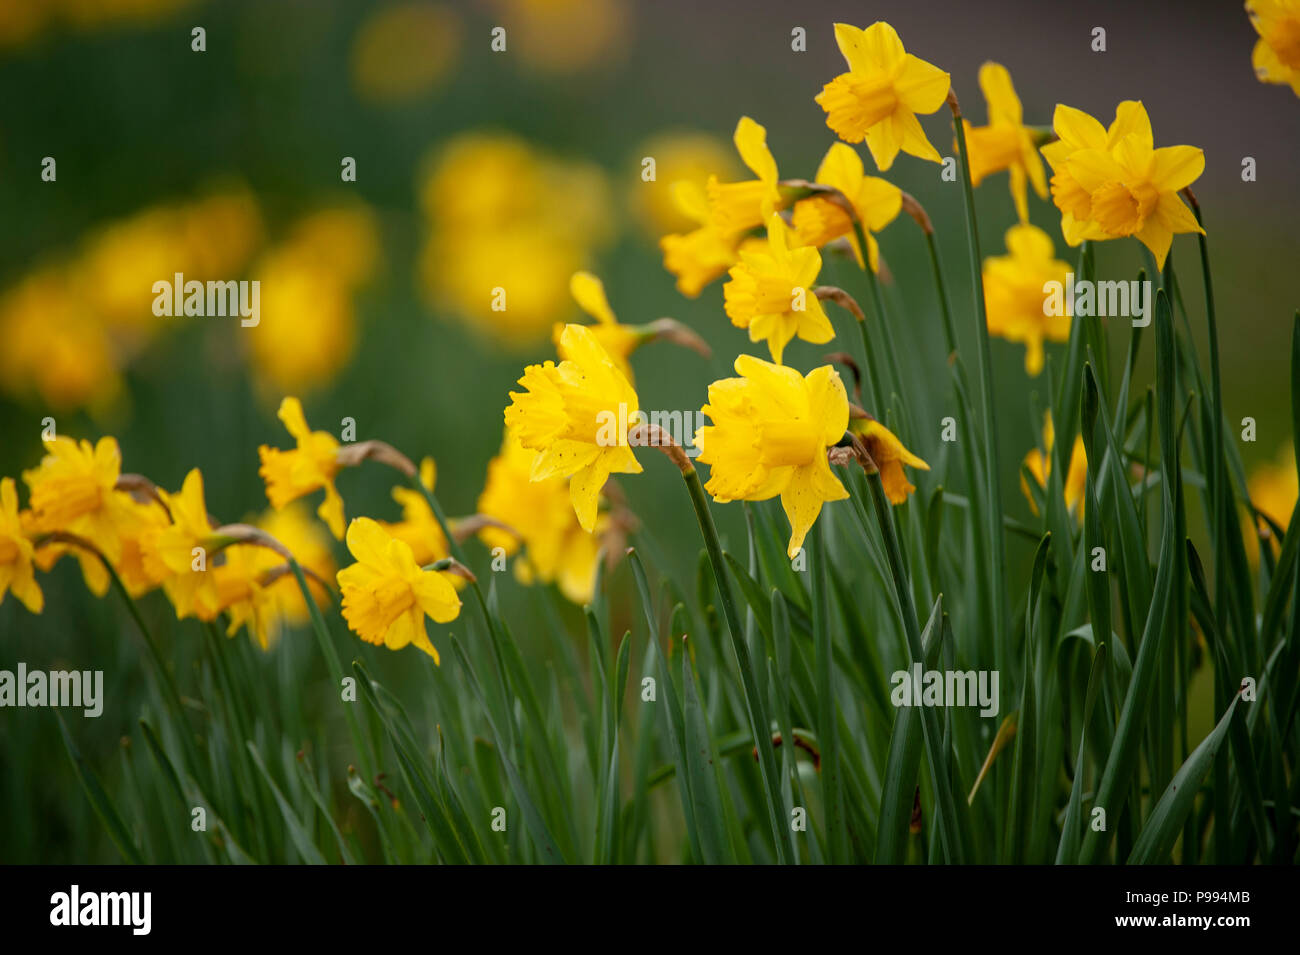 Daffodils blooming in spring garden Stock Photo